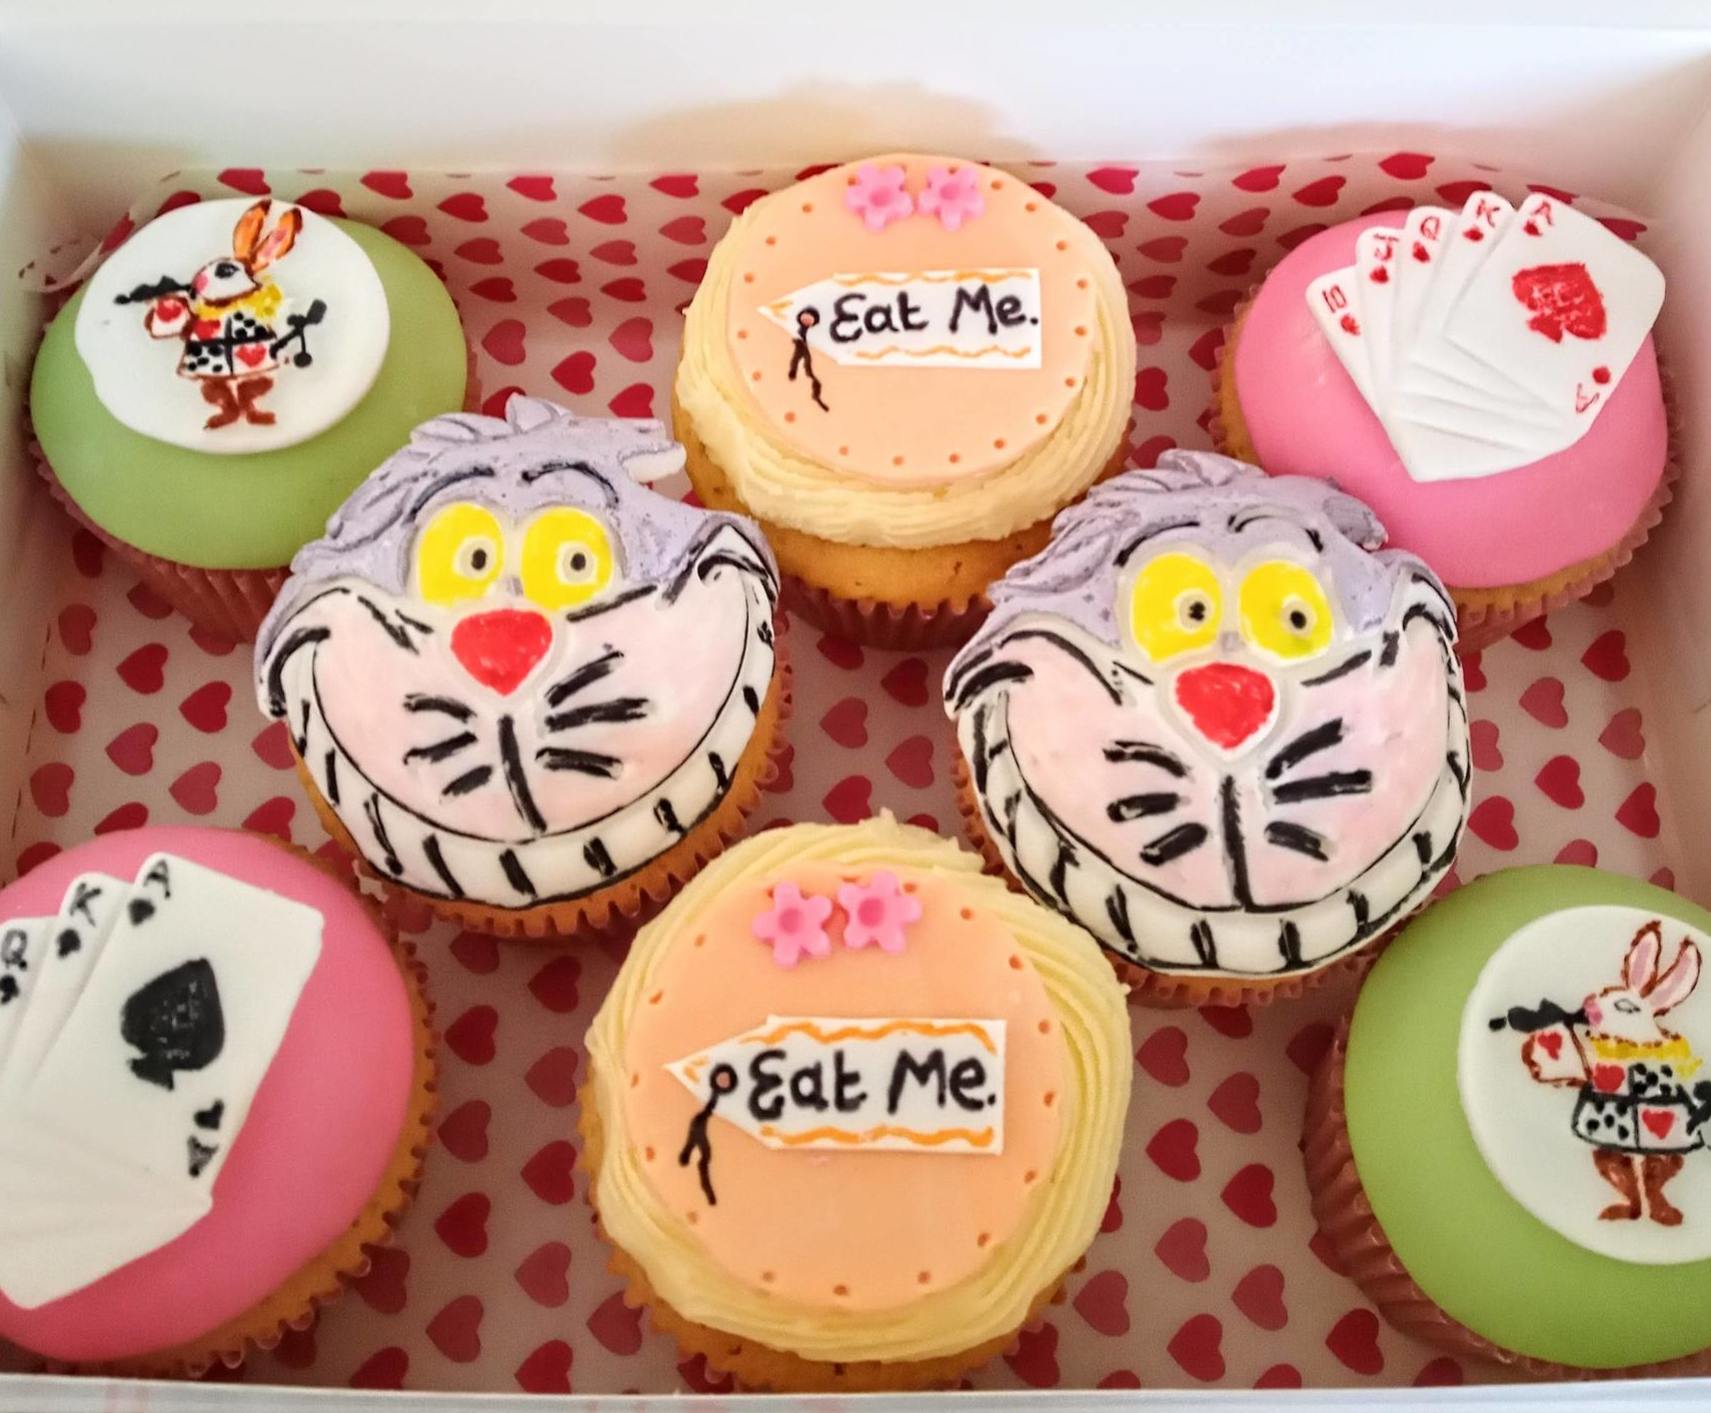 8 colourful "alice in wonderland" inspired cupcakes